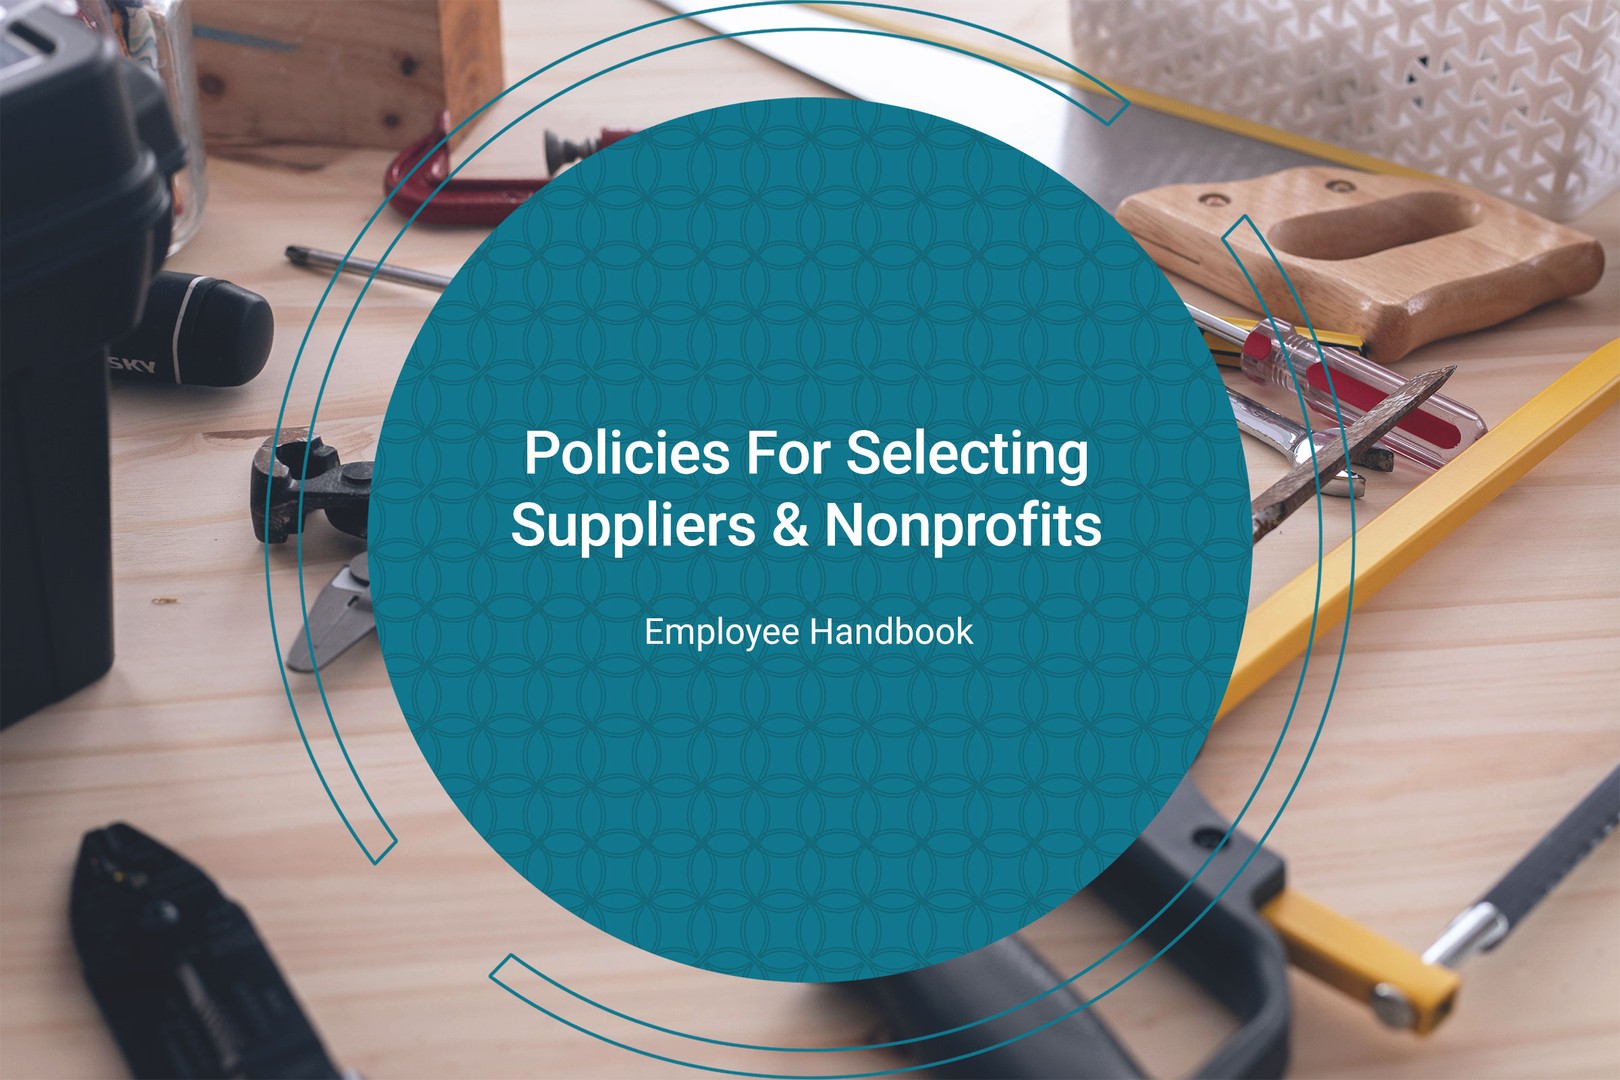 a teal circle containing the text 'policies for selecting suppliers and nonprofits' overlays a photo of a wooden workbench covered in tools